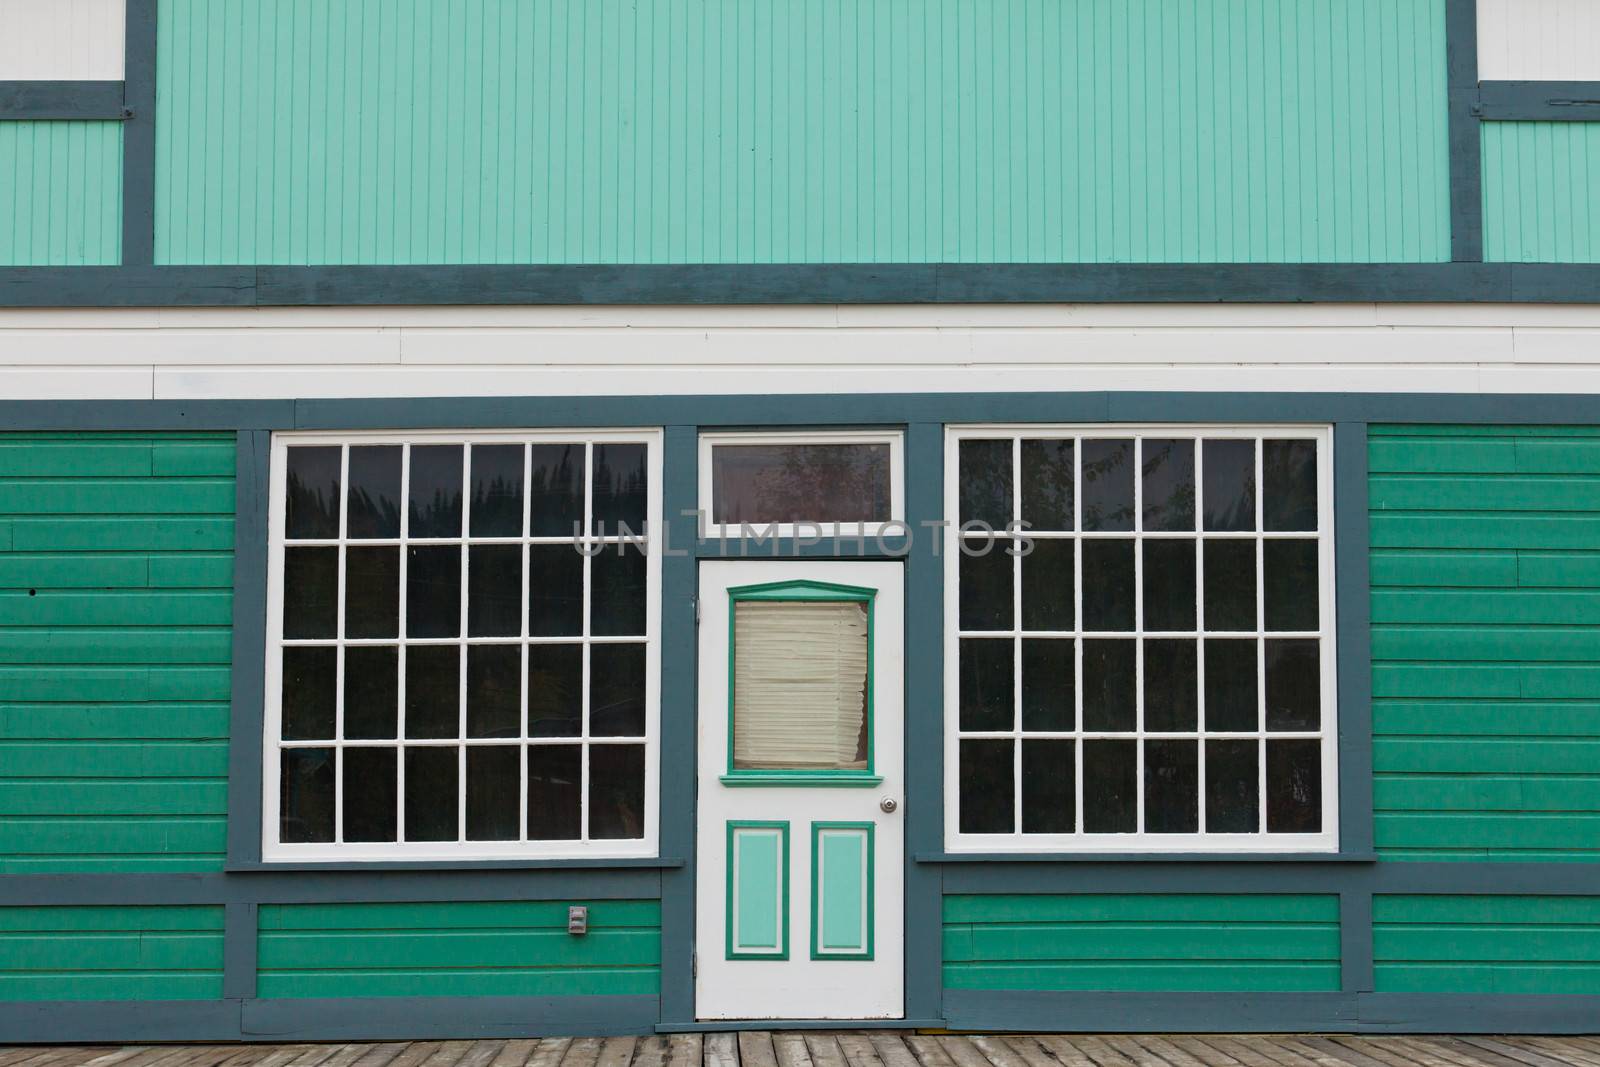 Symmetrical view of the front door and entrance to a quaint green wooden house with large cottage pane windows on either side